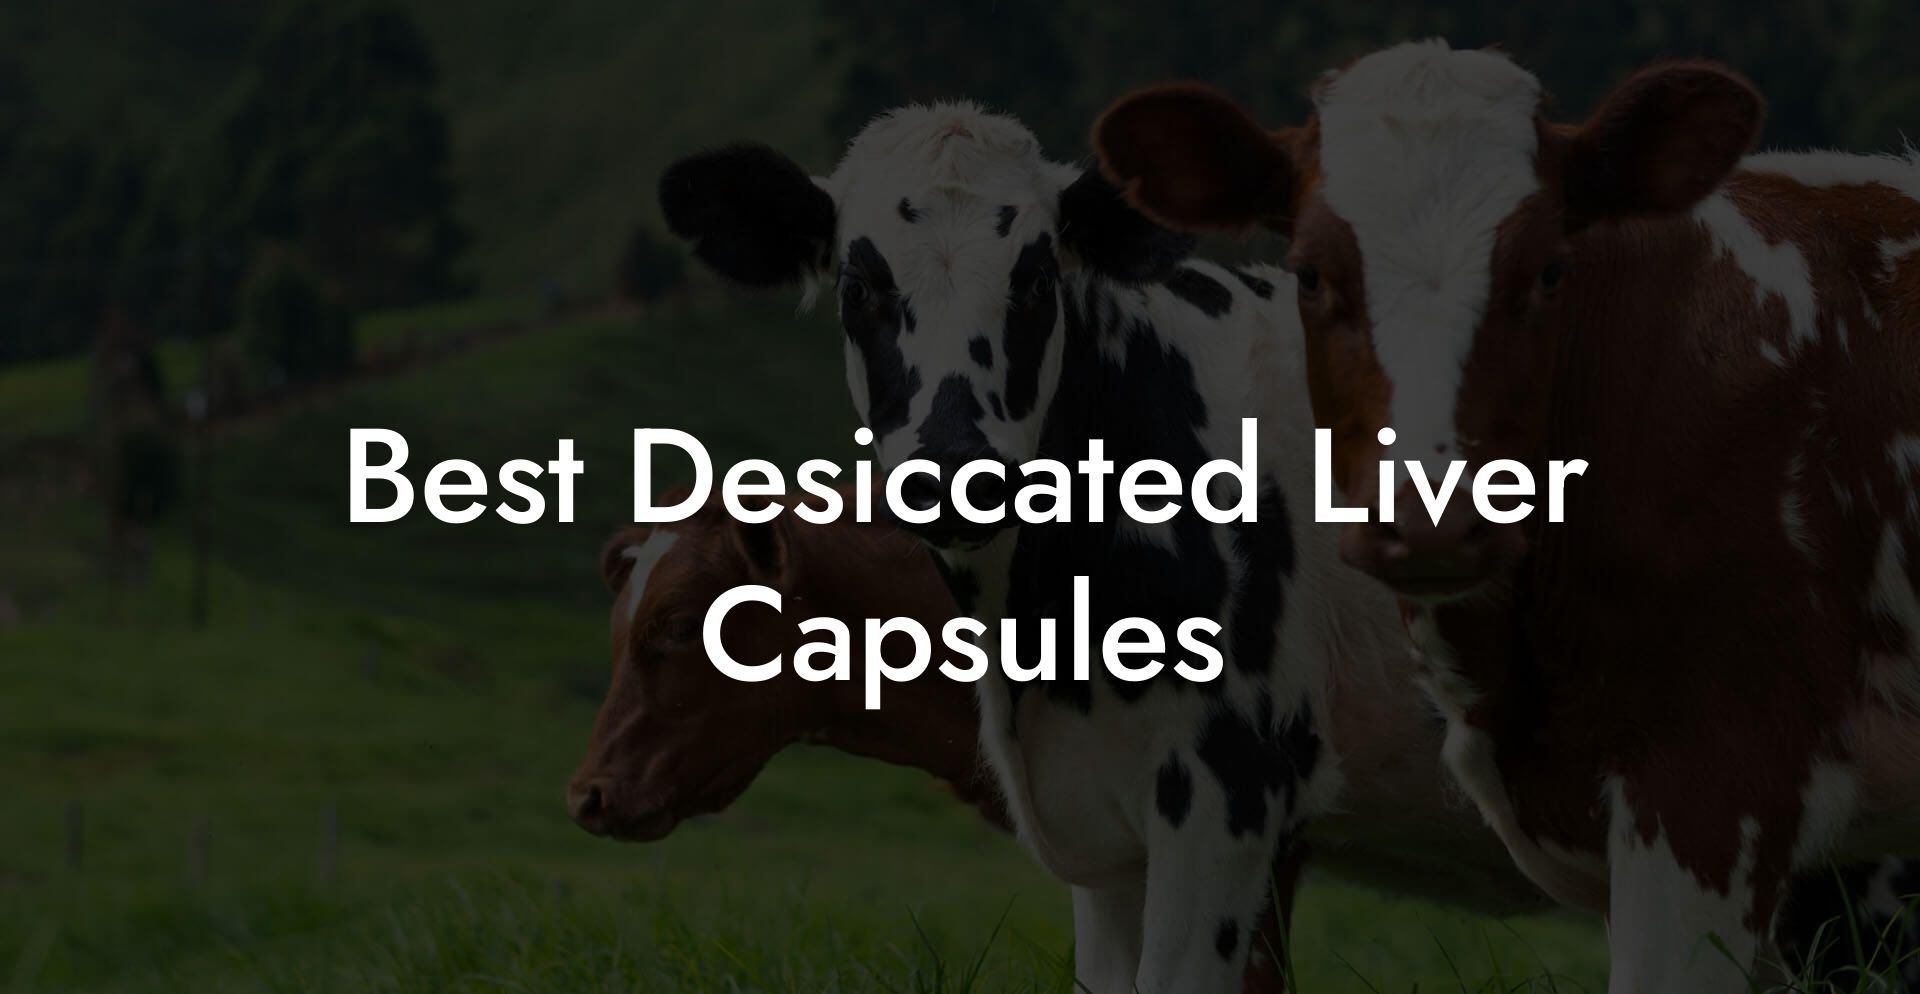 Best Desiccated Liver Capsules